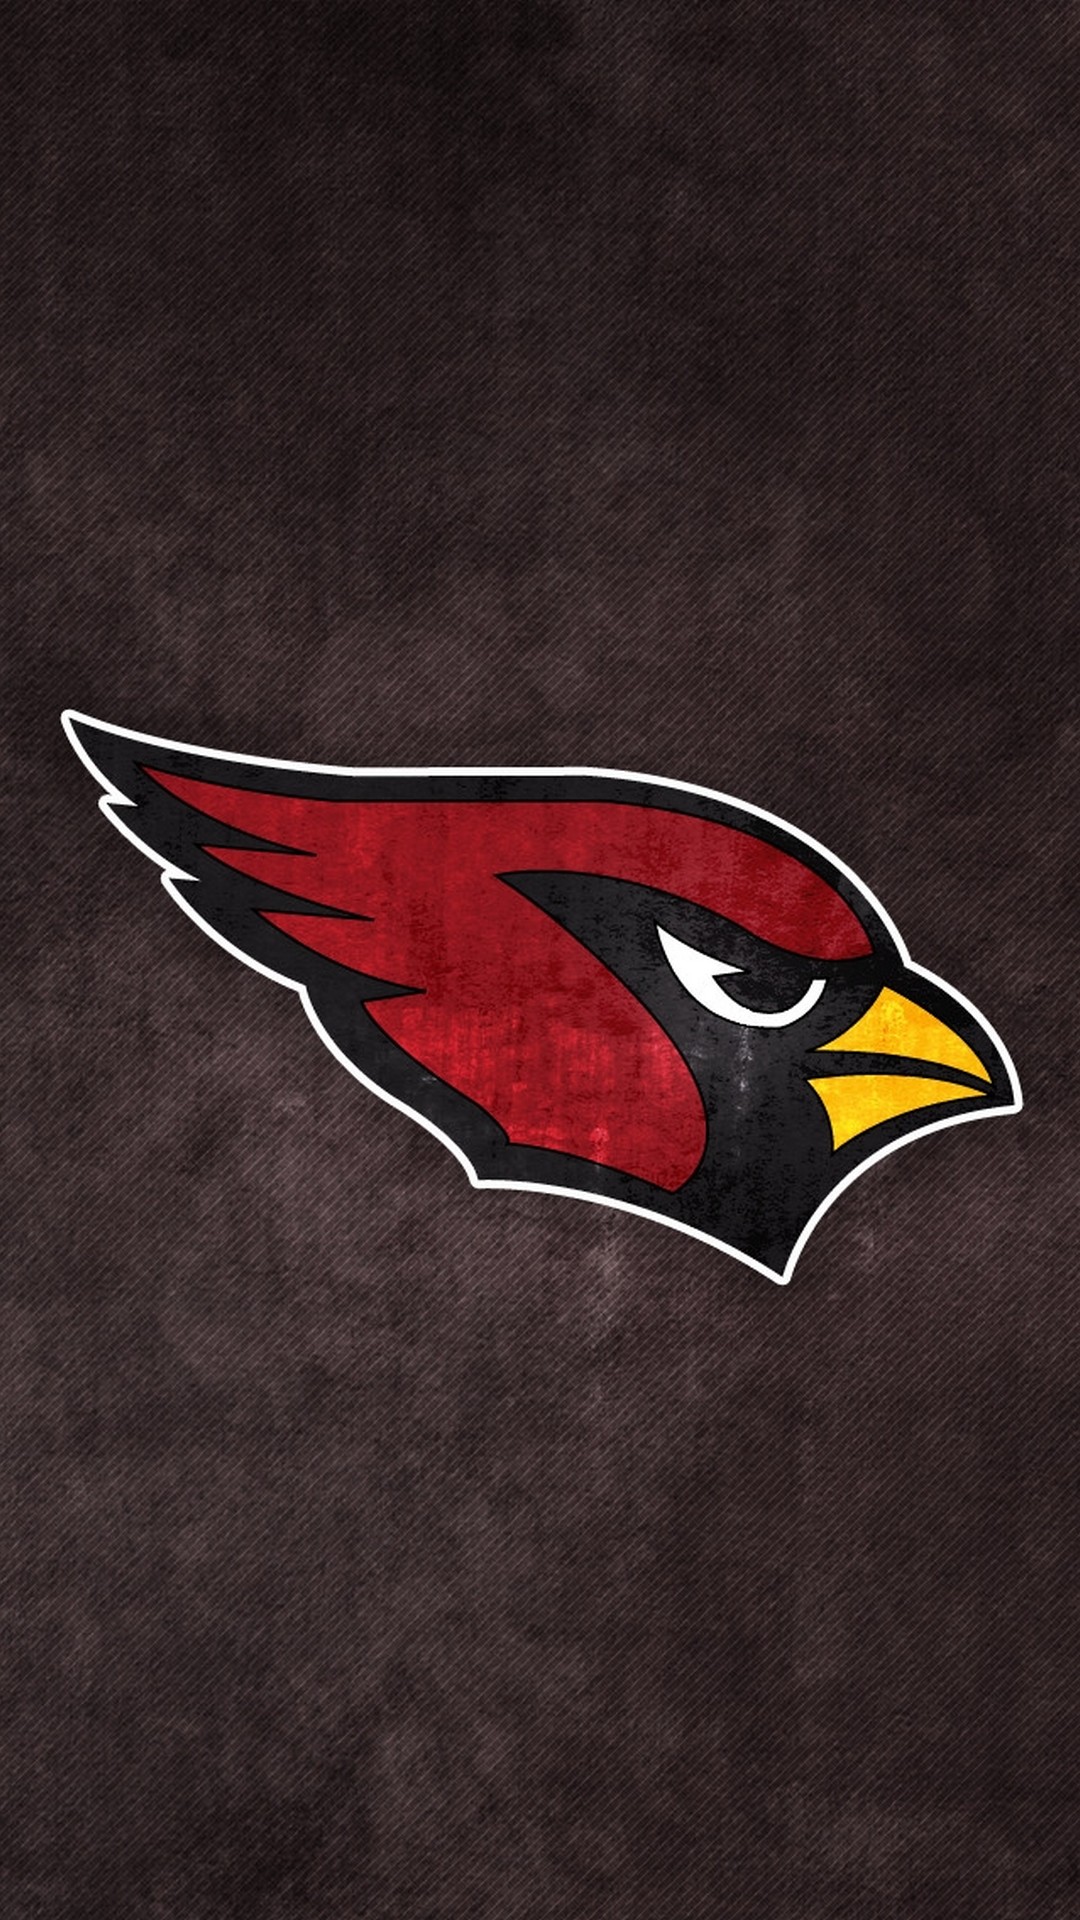 Arizona Cardinals iPhone 6 Wallpaper with high-resolution 1080x1920 pixel. Download and set as wallpaper for Apple iPhone X, XS Max, XR, 8, 7, 6, SE, iPad, Android